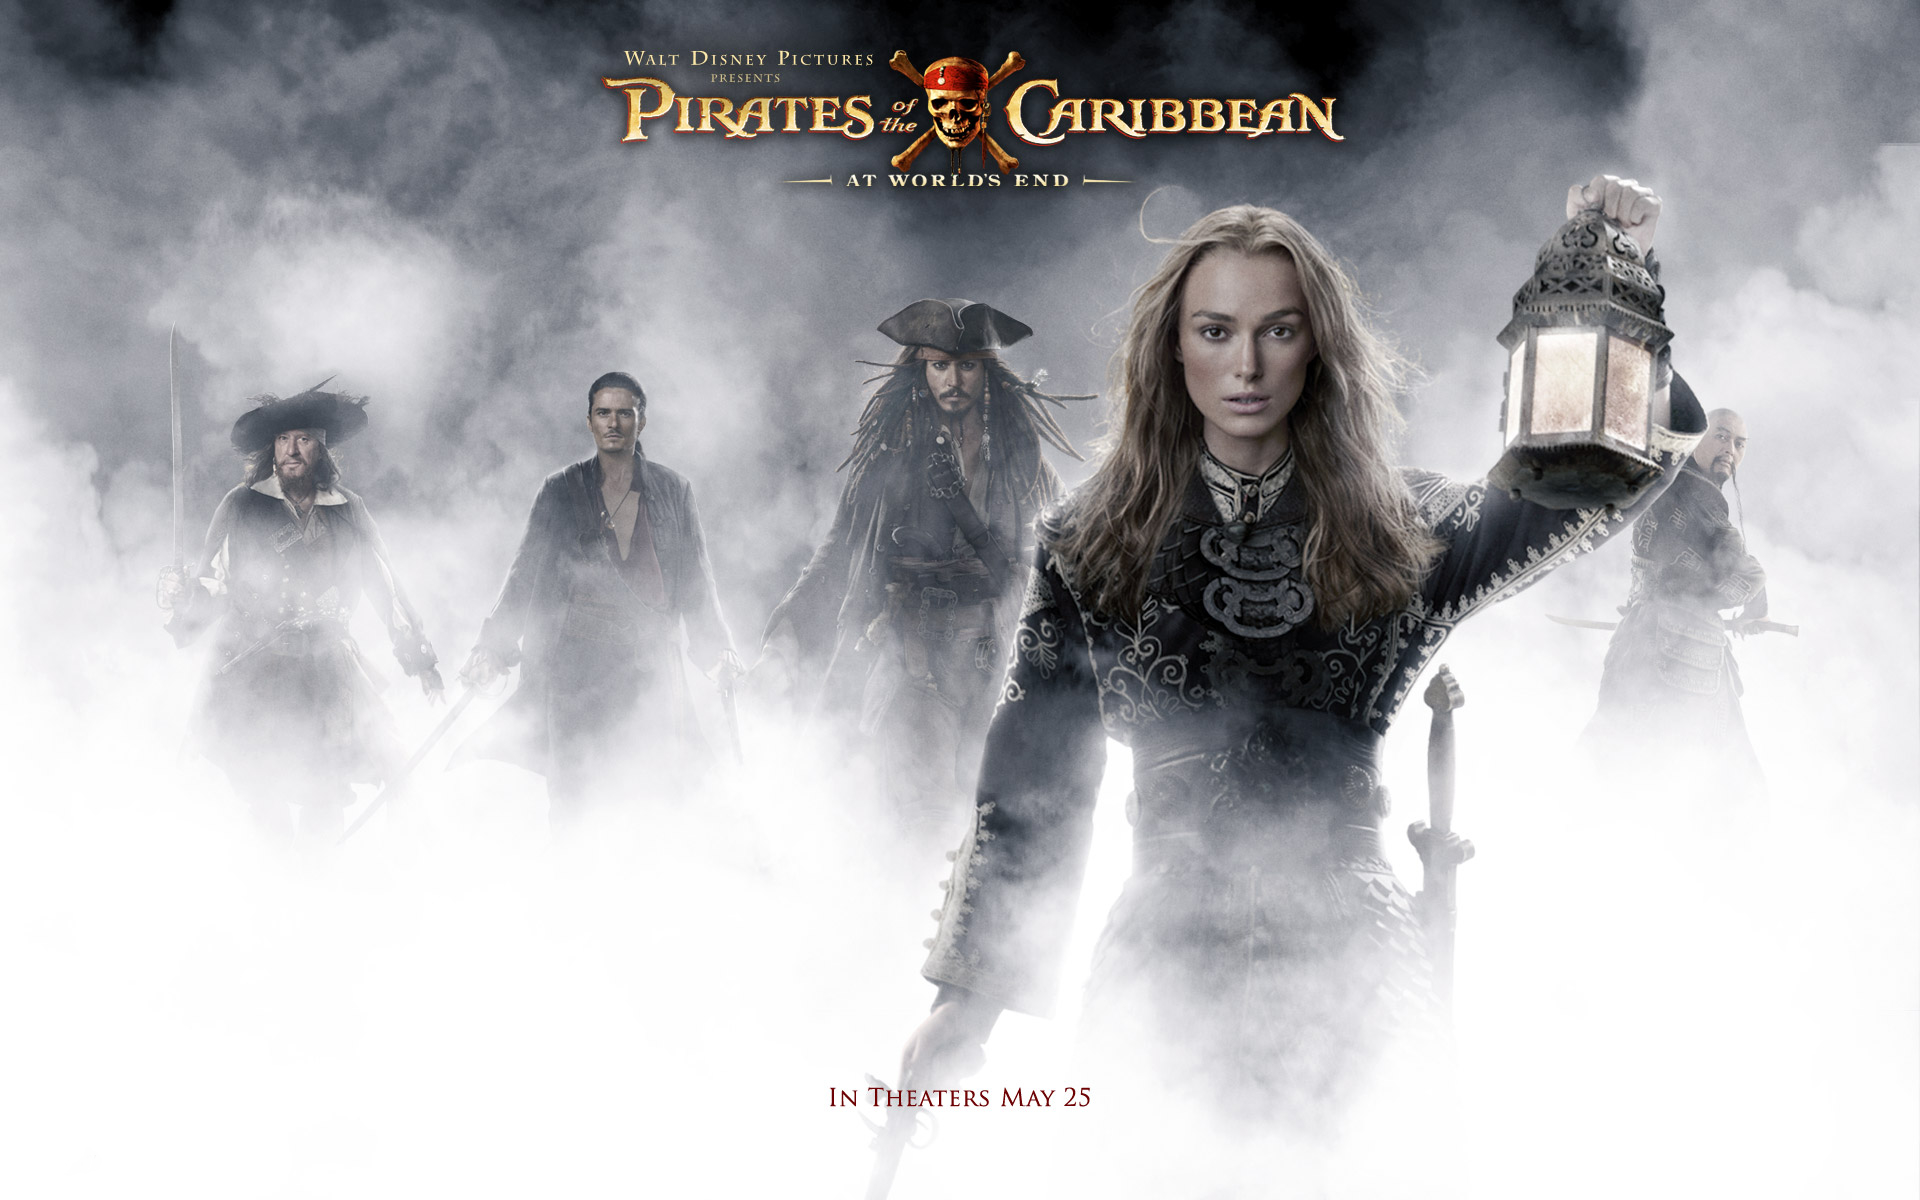 Pirates of the Caribbean characters including Keira Knightley, Johnny Depp, and Orlando Bloom.